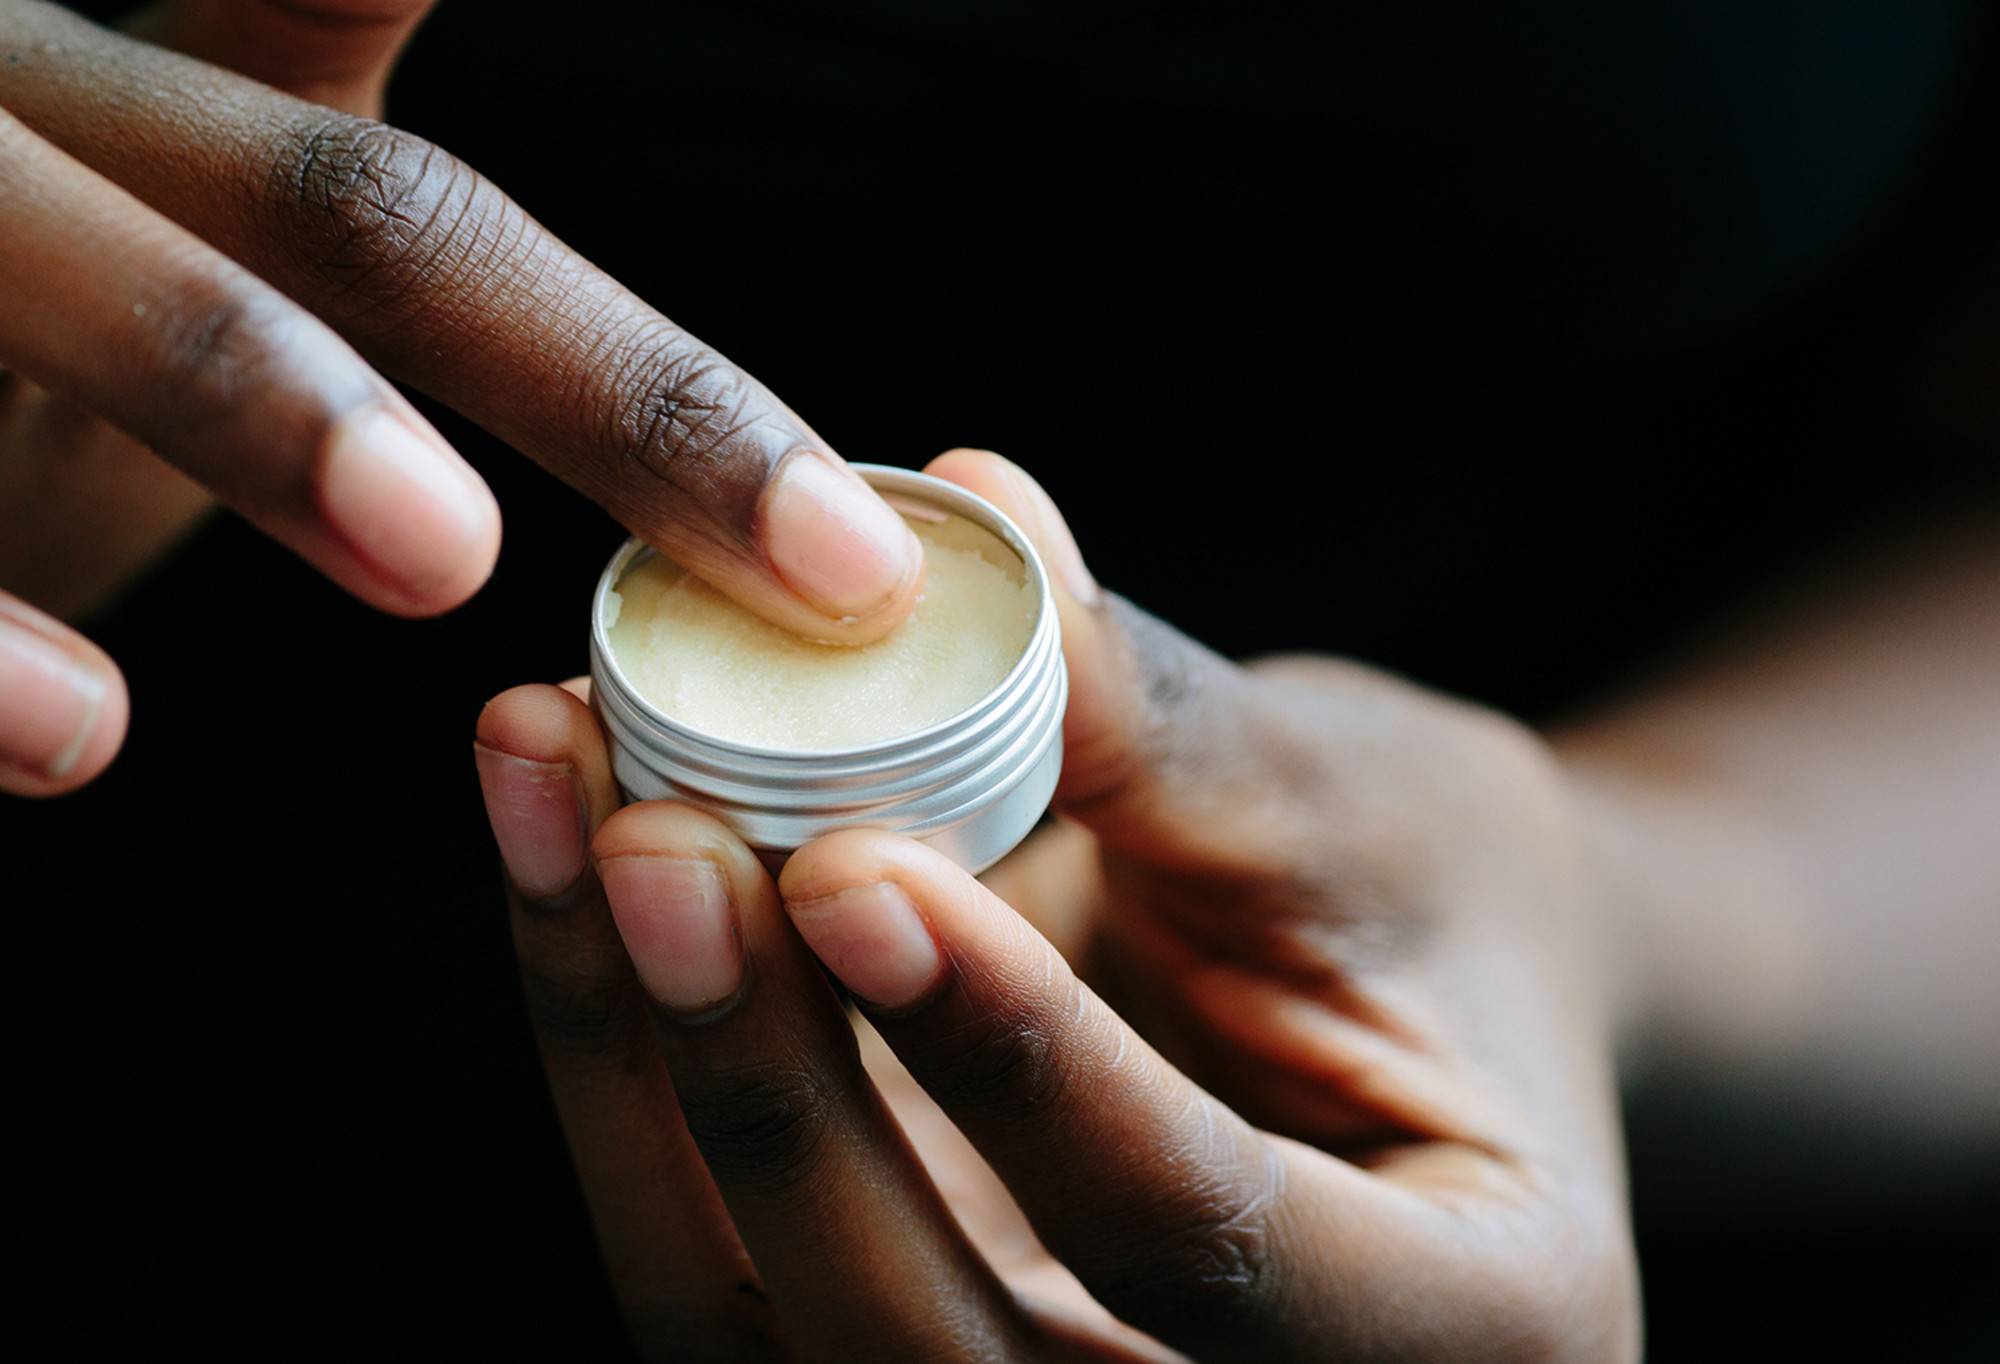 A finger is rubbed in a small round tin of thick, buttery yellow None Of Your Beeswax lip balm.